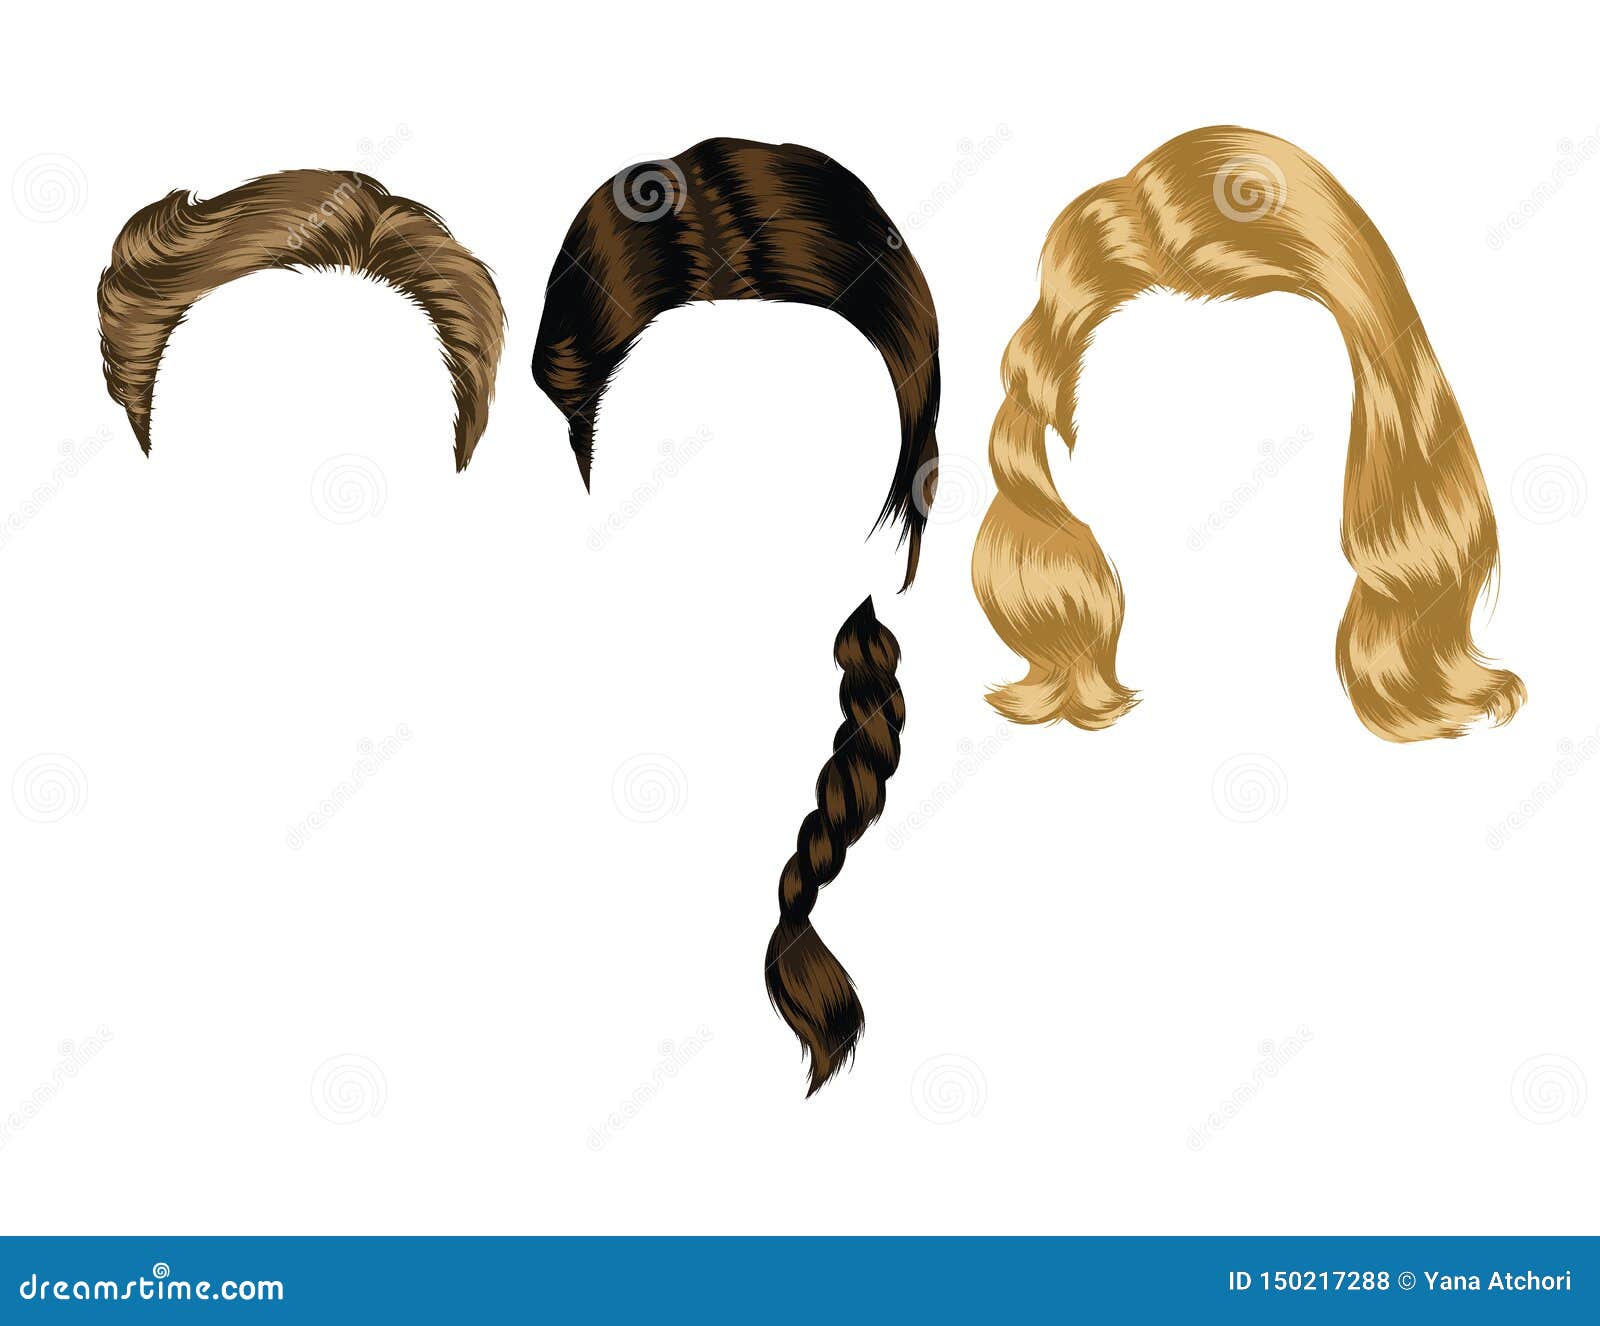 Color Vector Illustration of Women`s Hairstyles from Hair of Different  Lengths. Stock Vector - Illustration of girls, background: 150217288